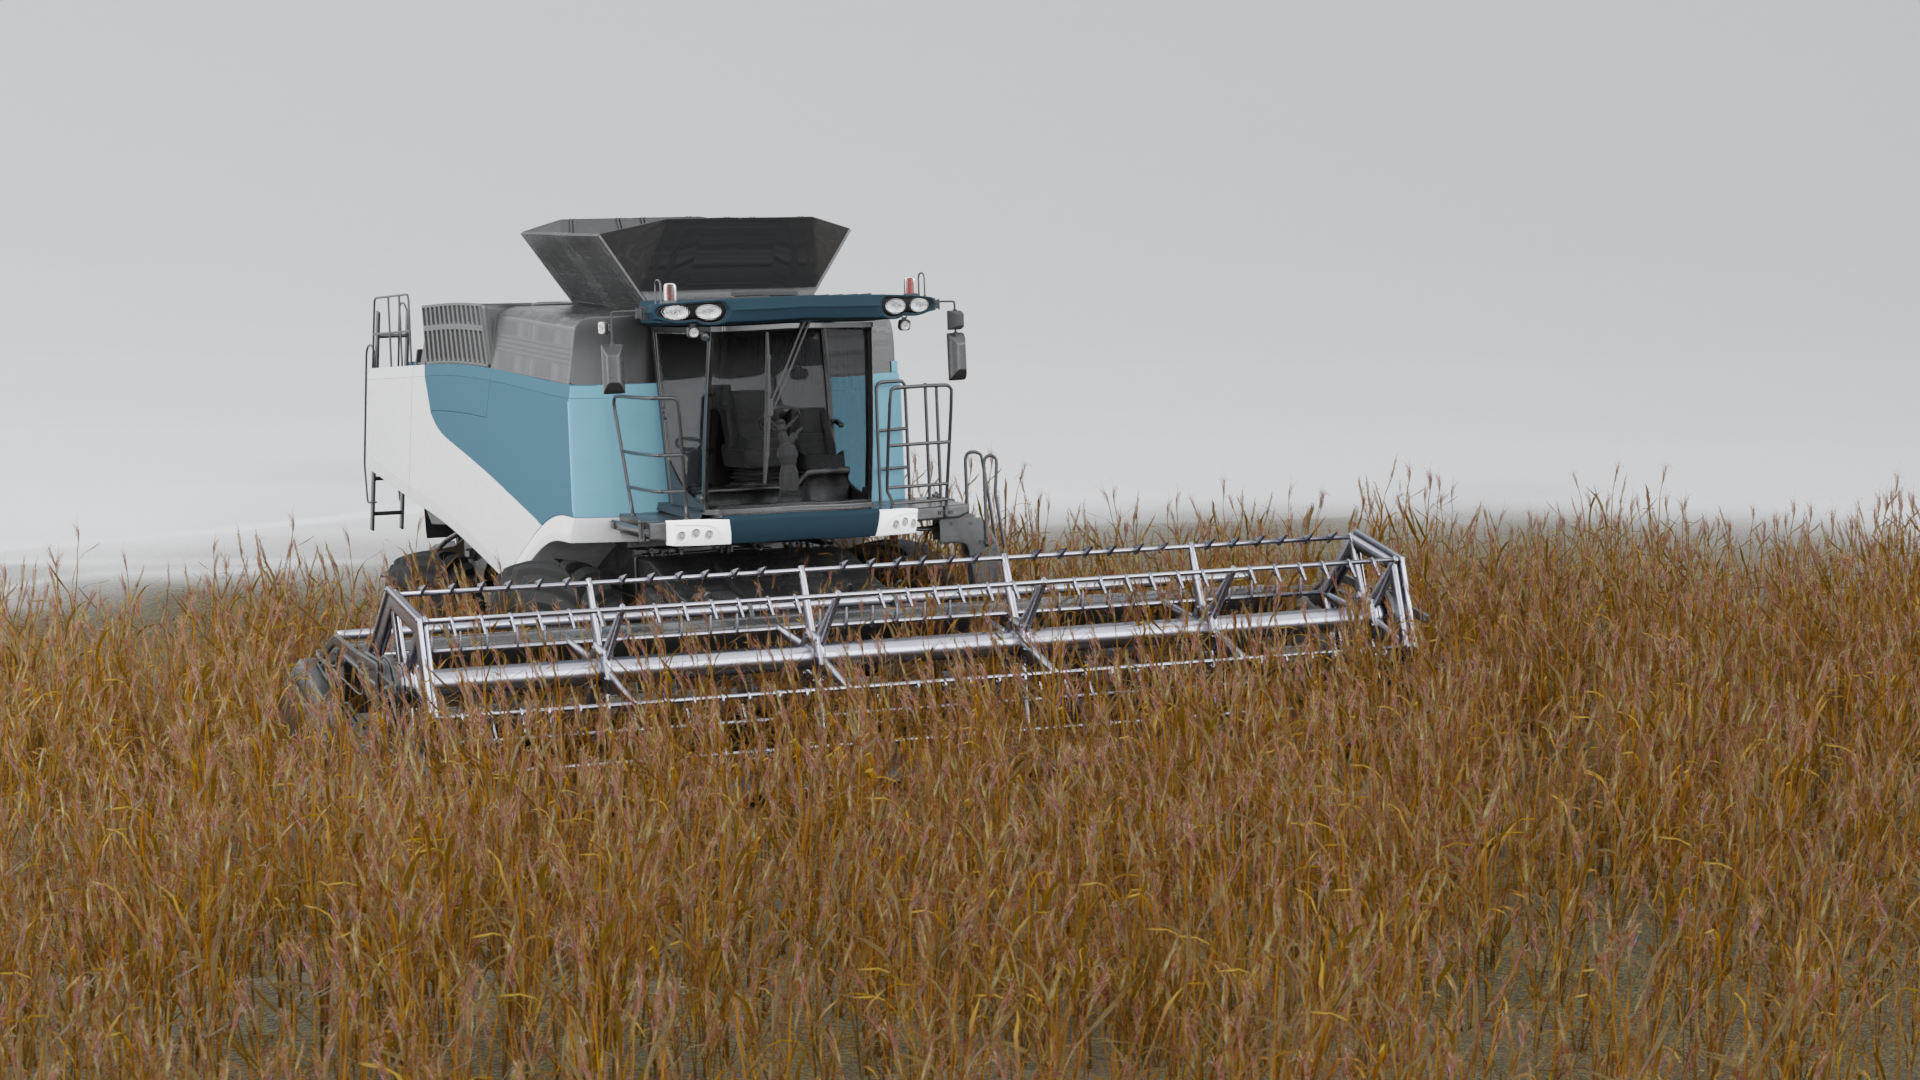 Combine harvester representing agricultural equipment